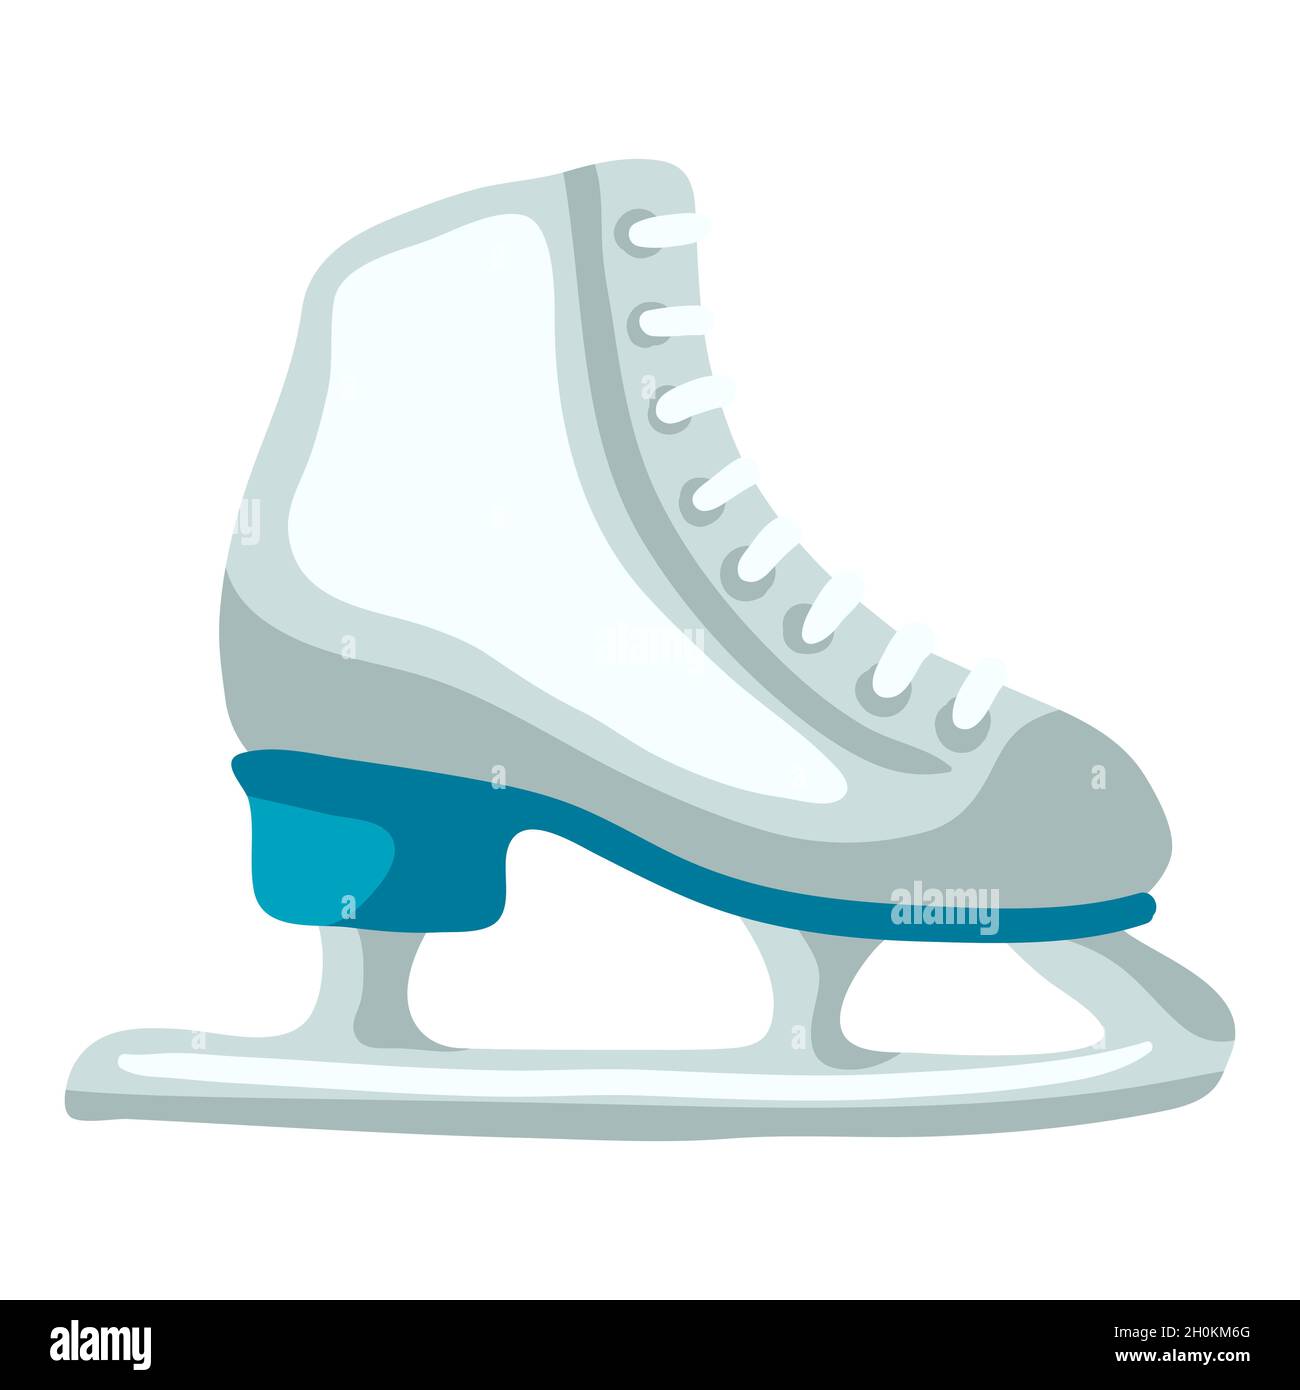 Winter illustration of skates. Symbol in hand drawn style. Stock Vector